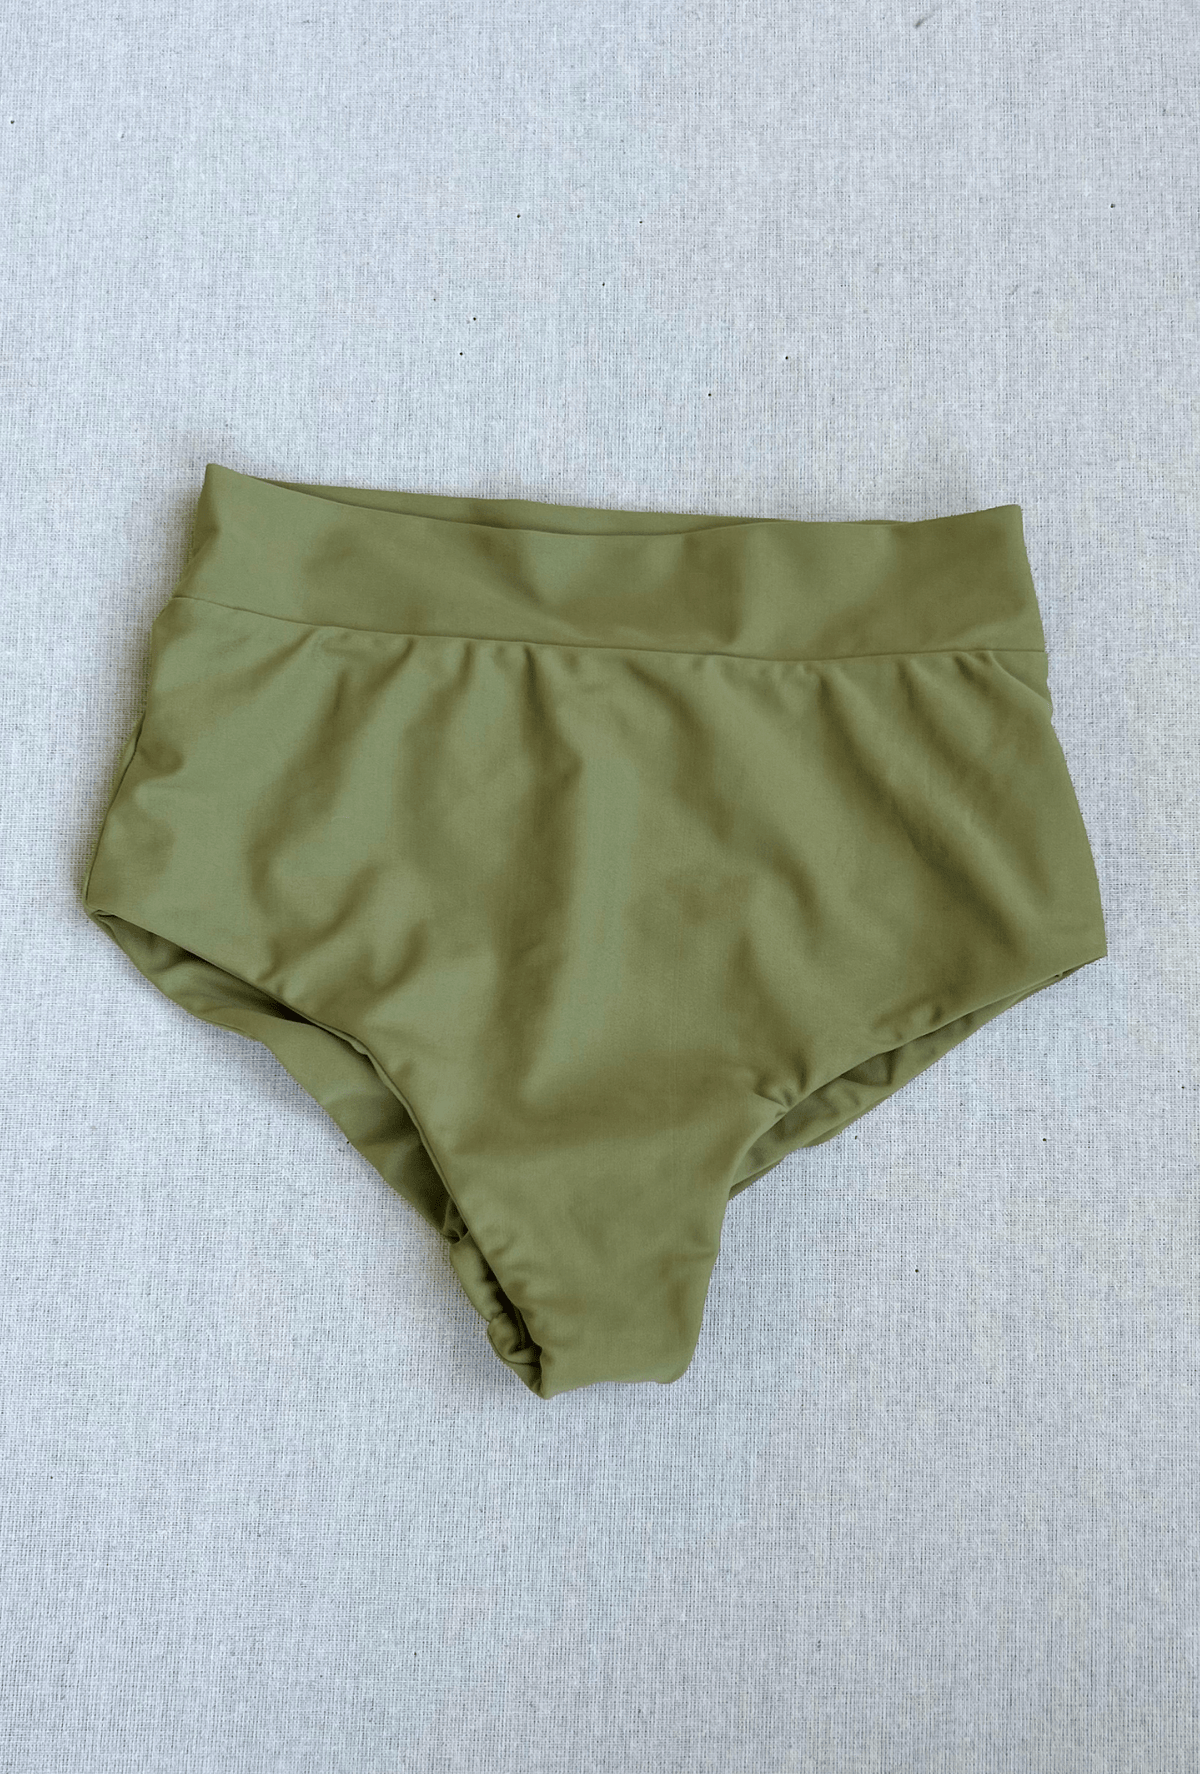 cole bottom in olive - size xs